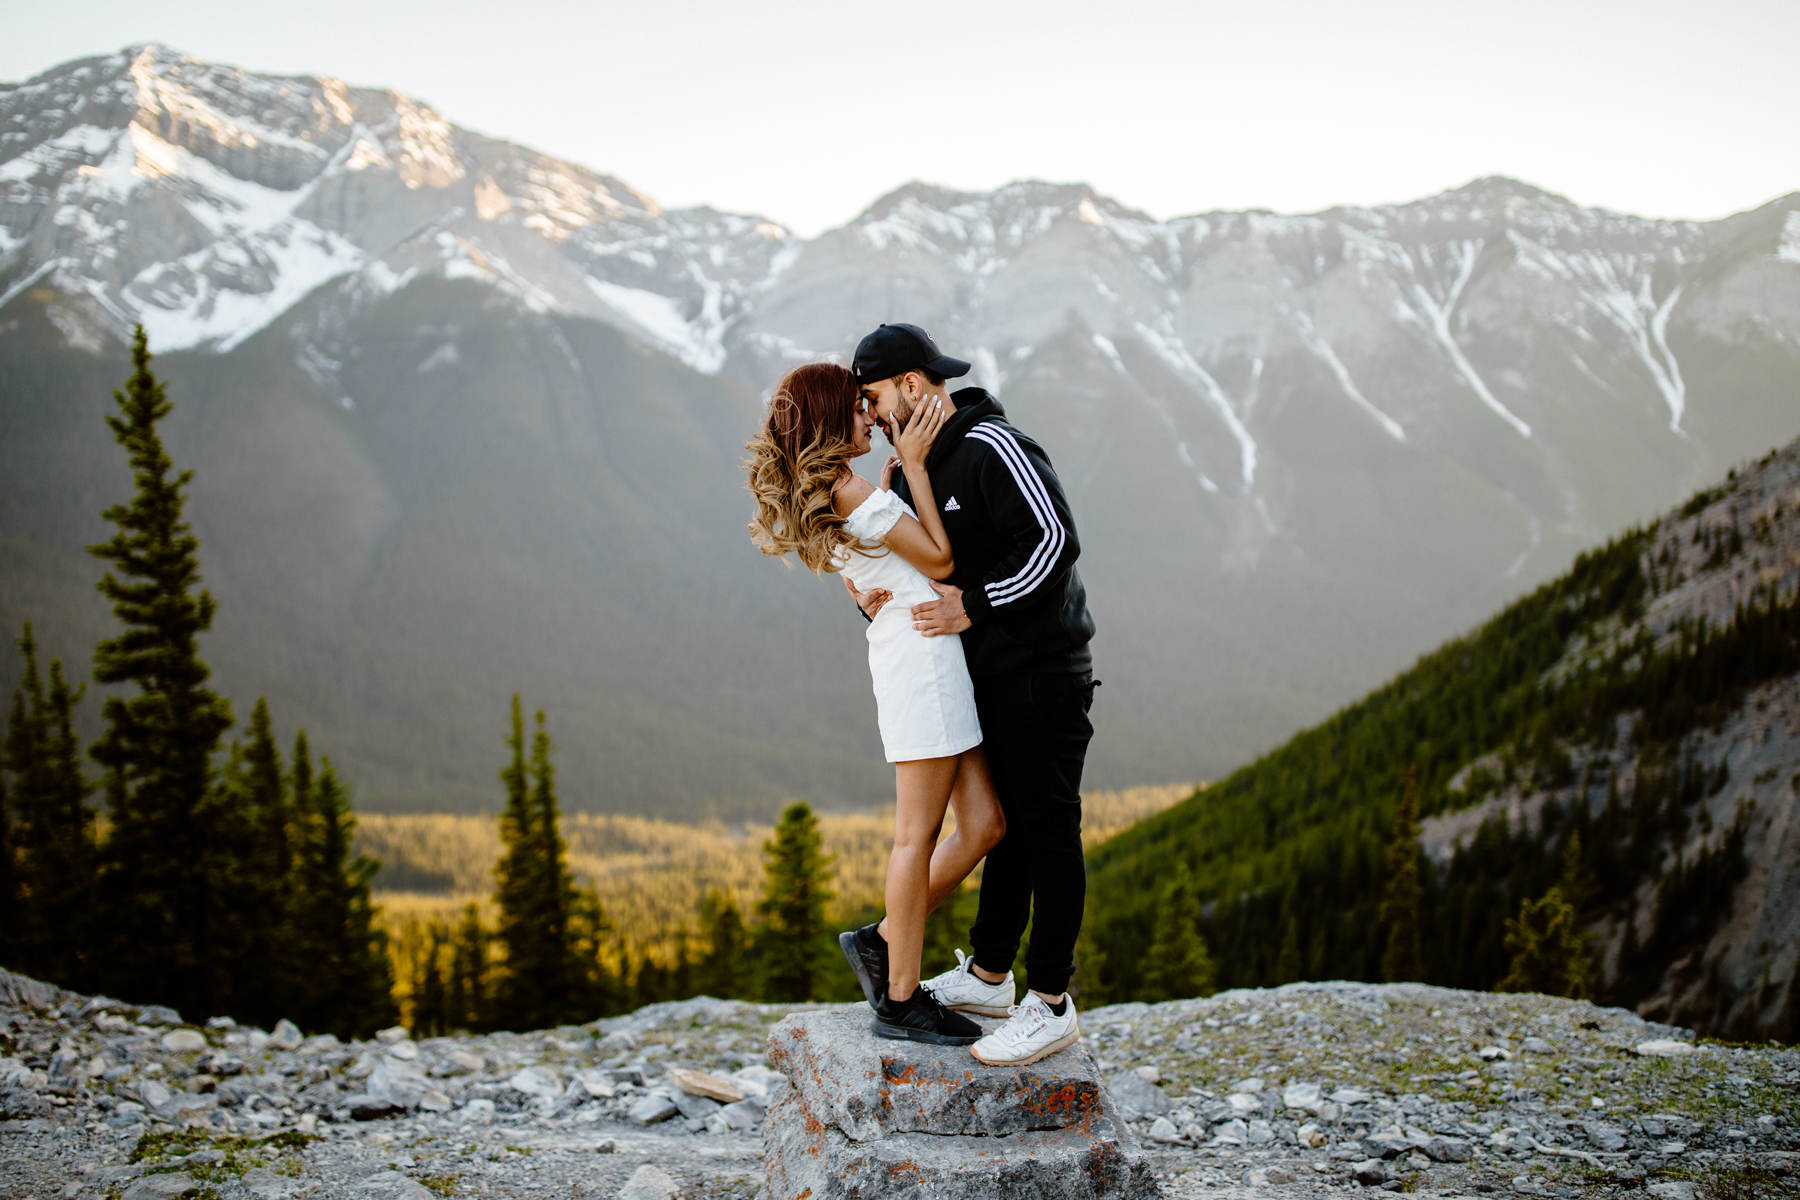 Surprise Proposal Photographers in Banff - Photo 13